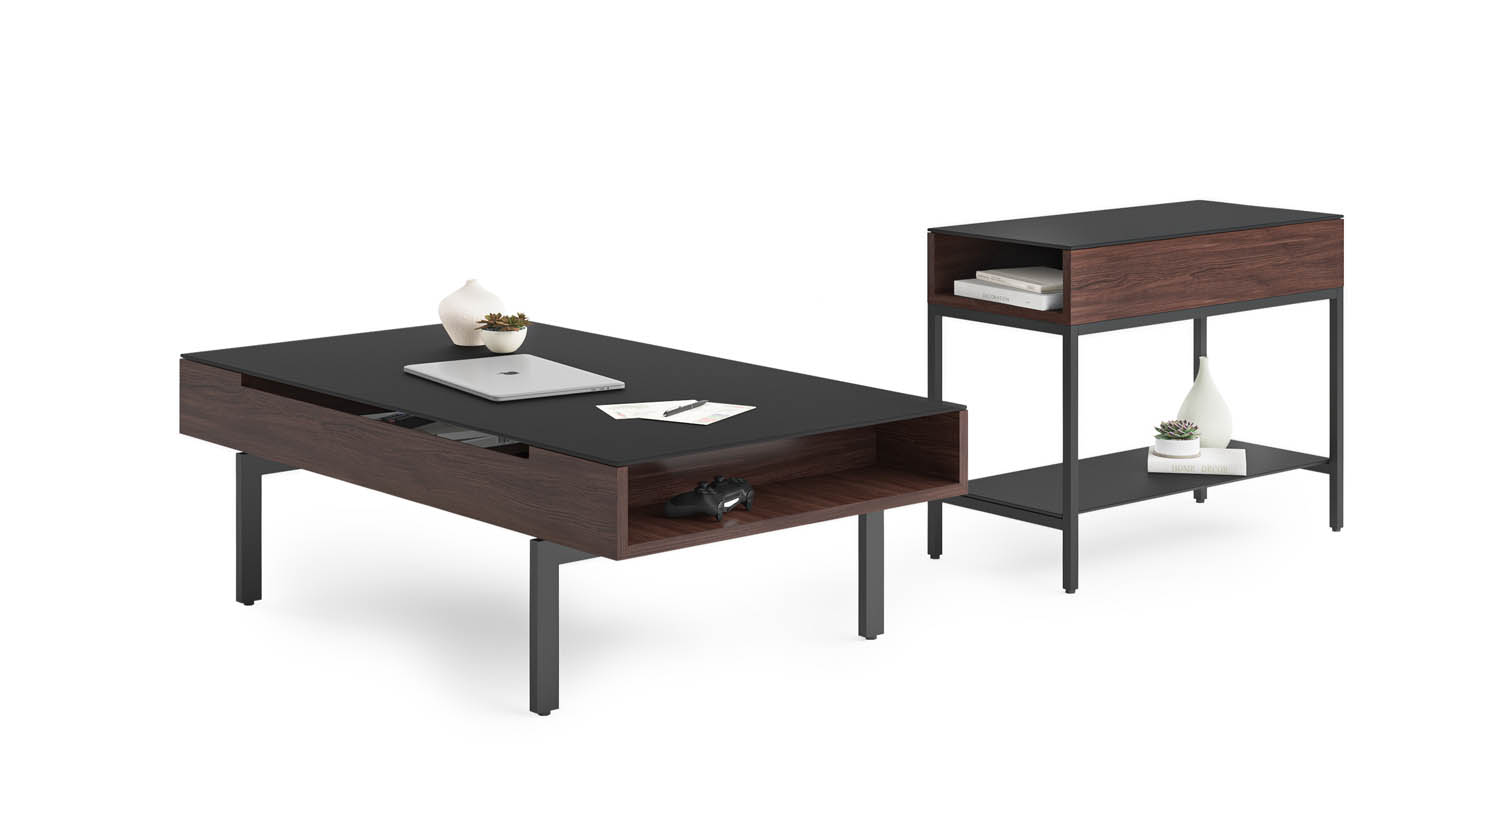 https://www.circlefurniture.com/userfiles/images/Products/bdi/reveal-table/end-table/reveal-BDI-coffee-end-1192-1196-CWL-1-main.jpg